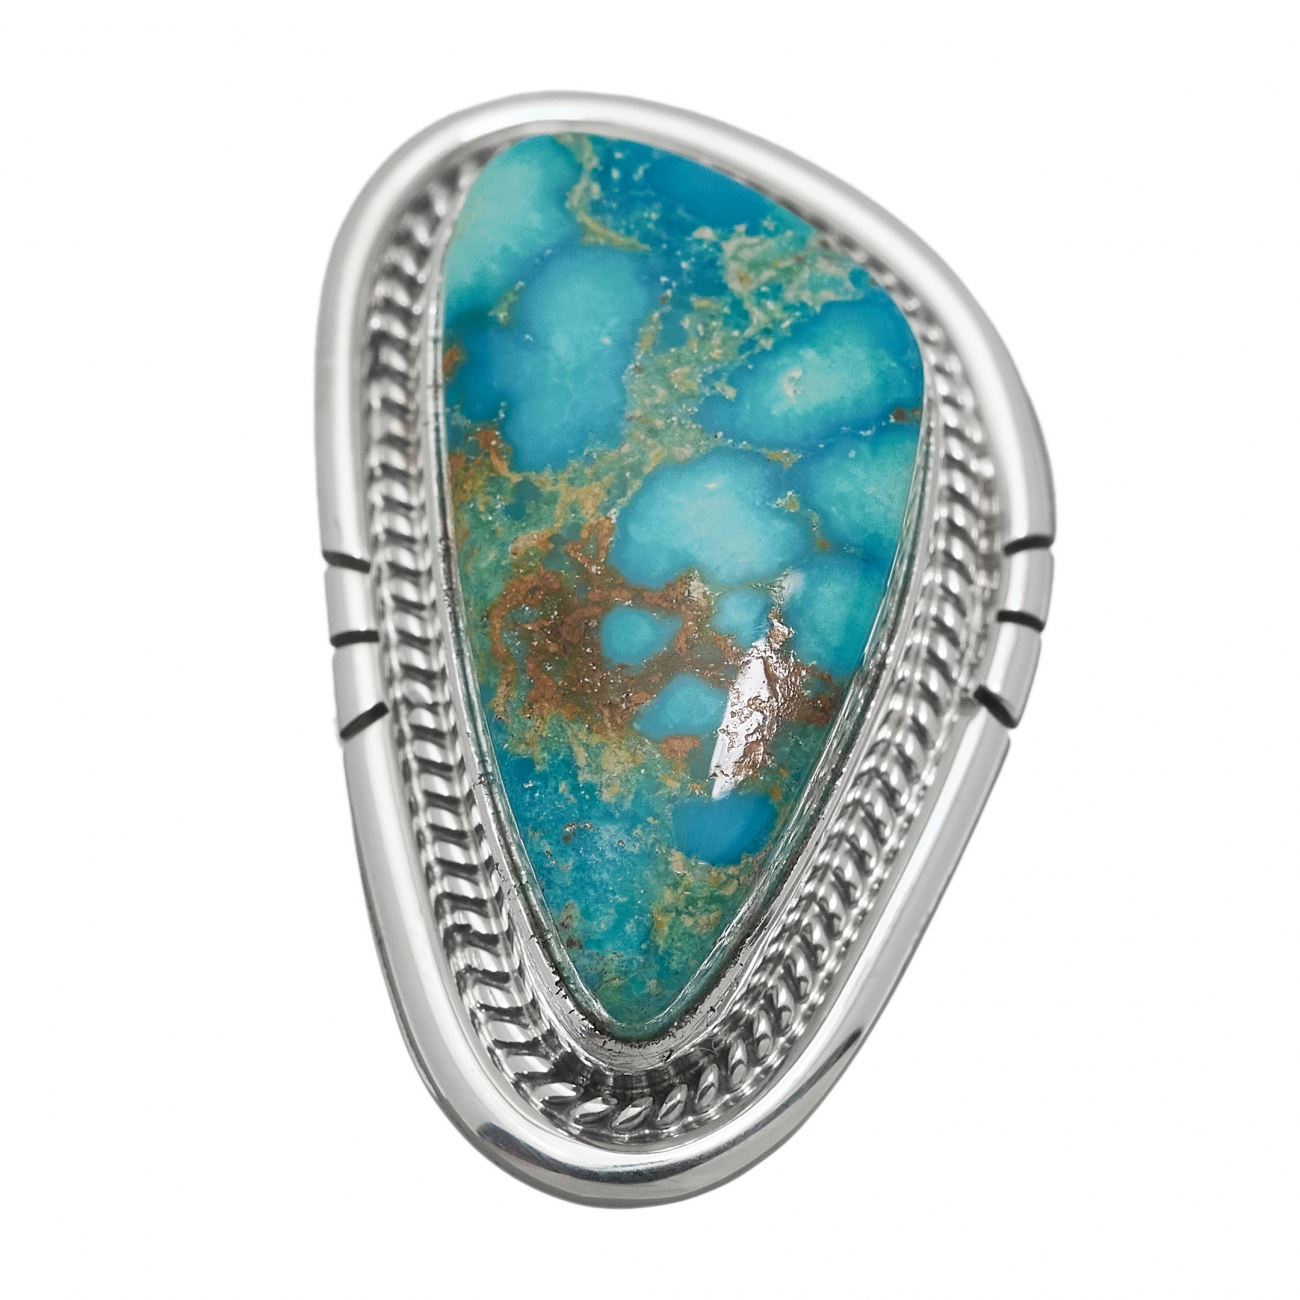 Navajo ring for women BA1139 in turquoise and silver - Harpo Paris